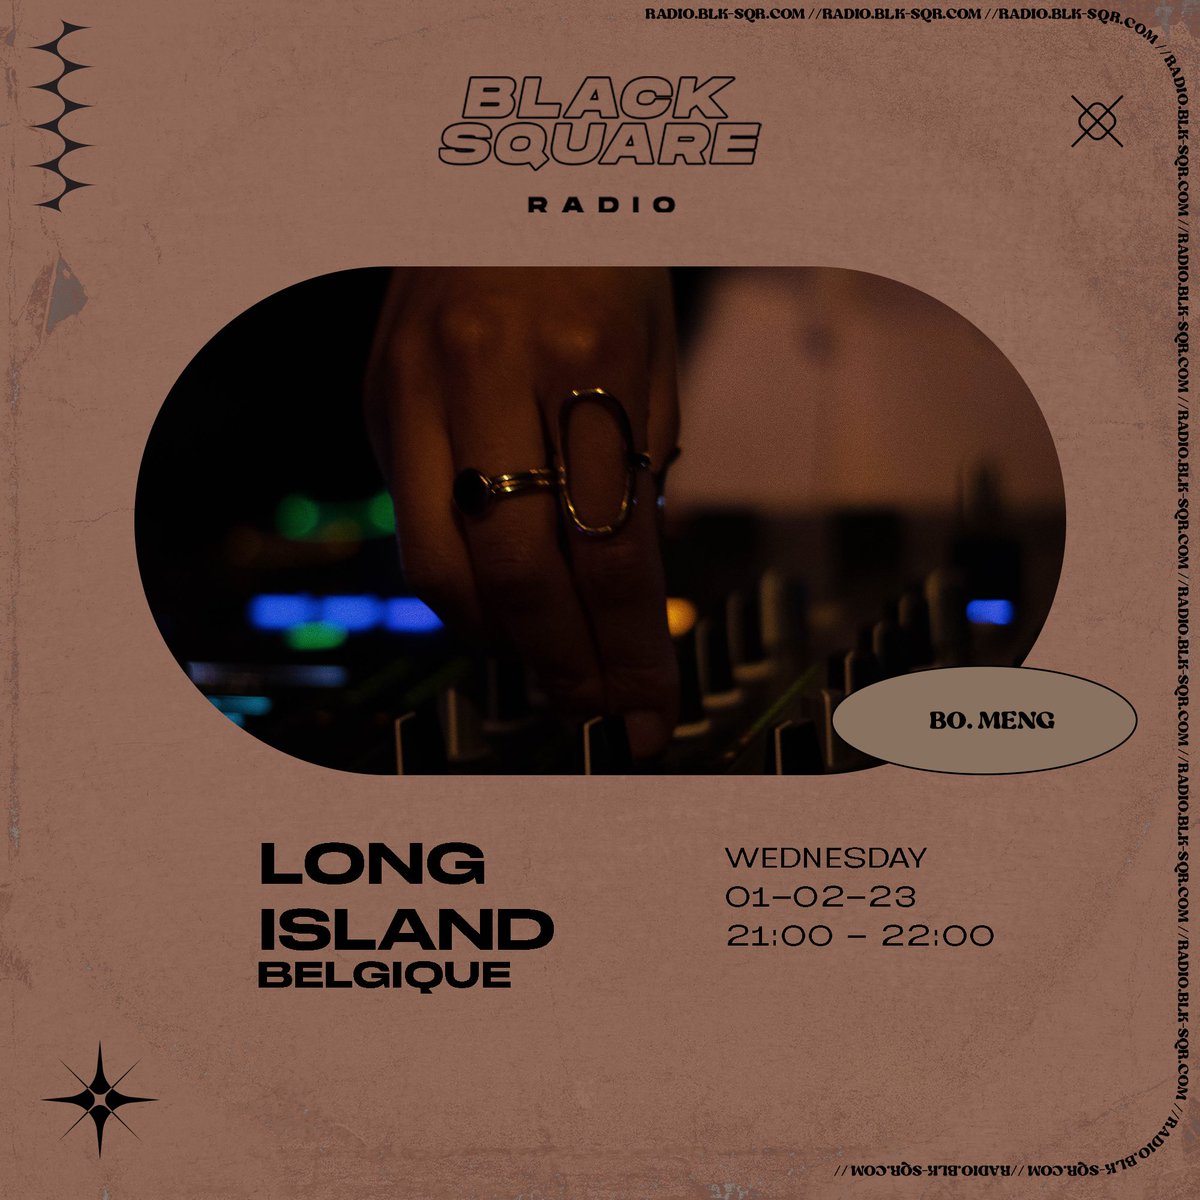 Guess who’s back… ?
Tonight from 9:00 to 10:00 pm (GMT) our resident DJ Bo Meng have your dose of music with the EP2 of Long Island. 
Tune in & Turn it up.
.
.
#blackradio #blackcontentcreators #blackartist.